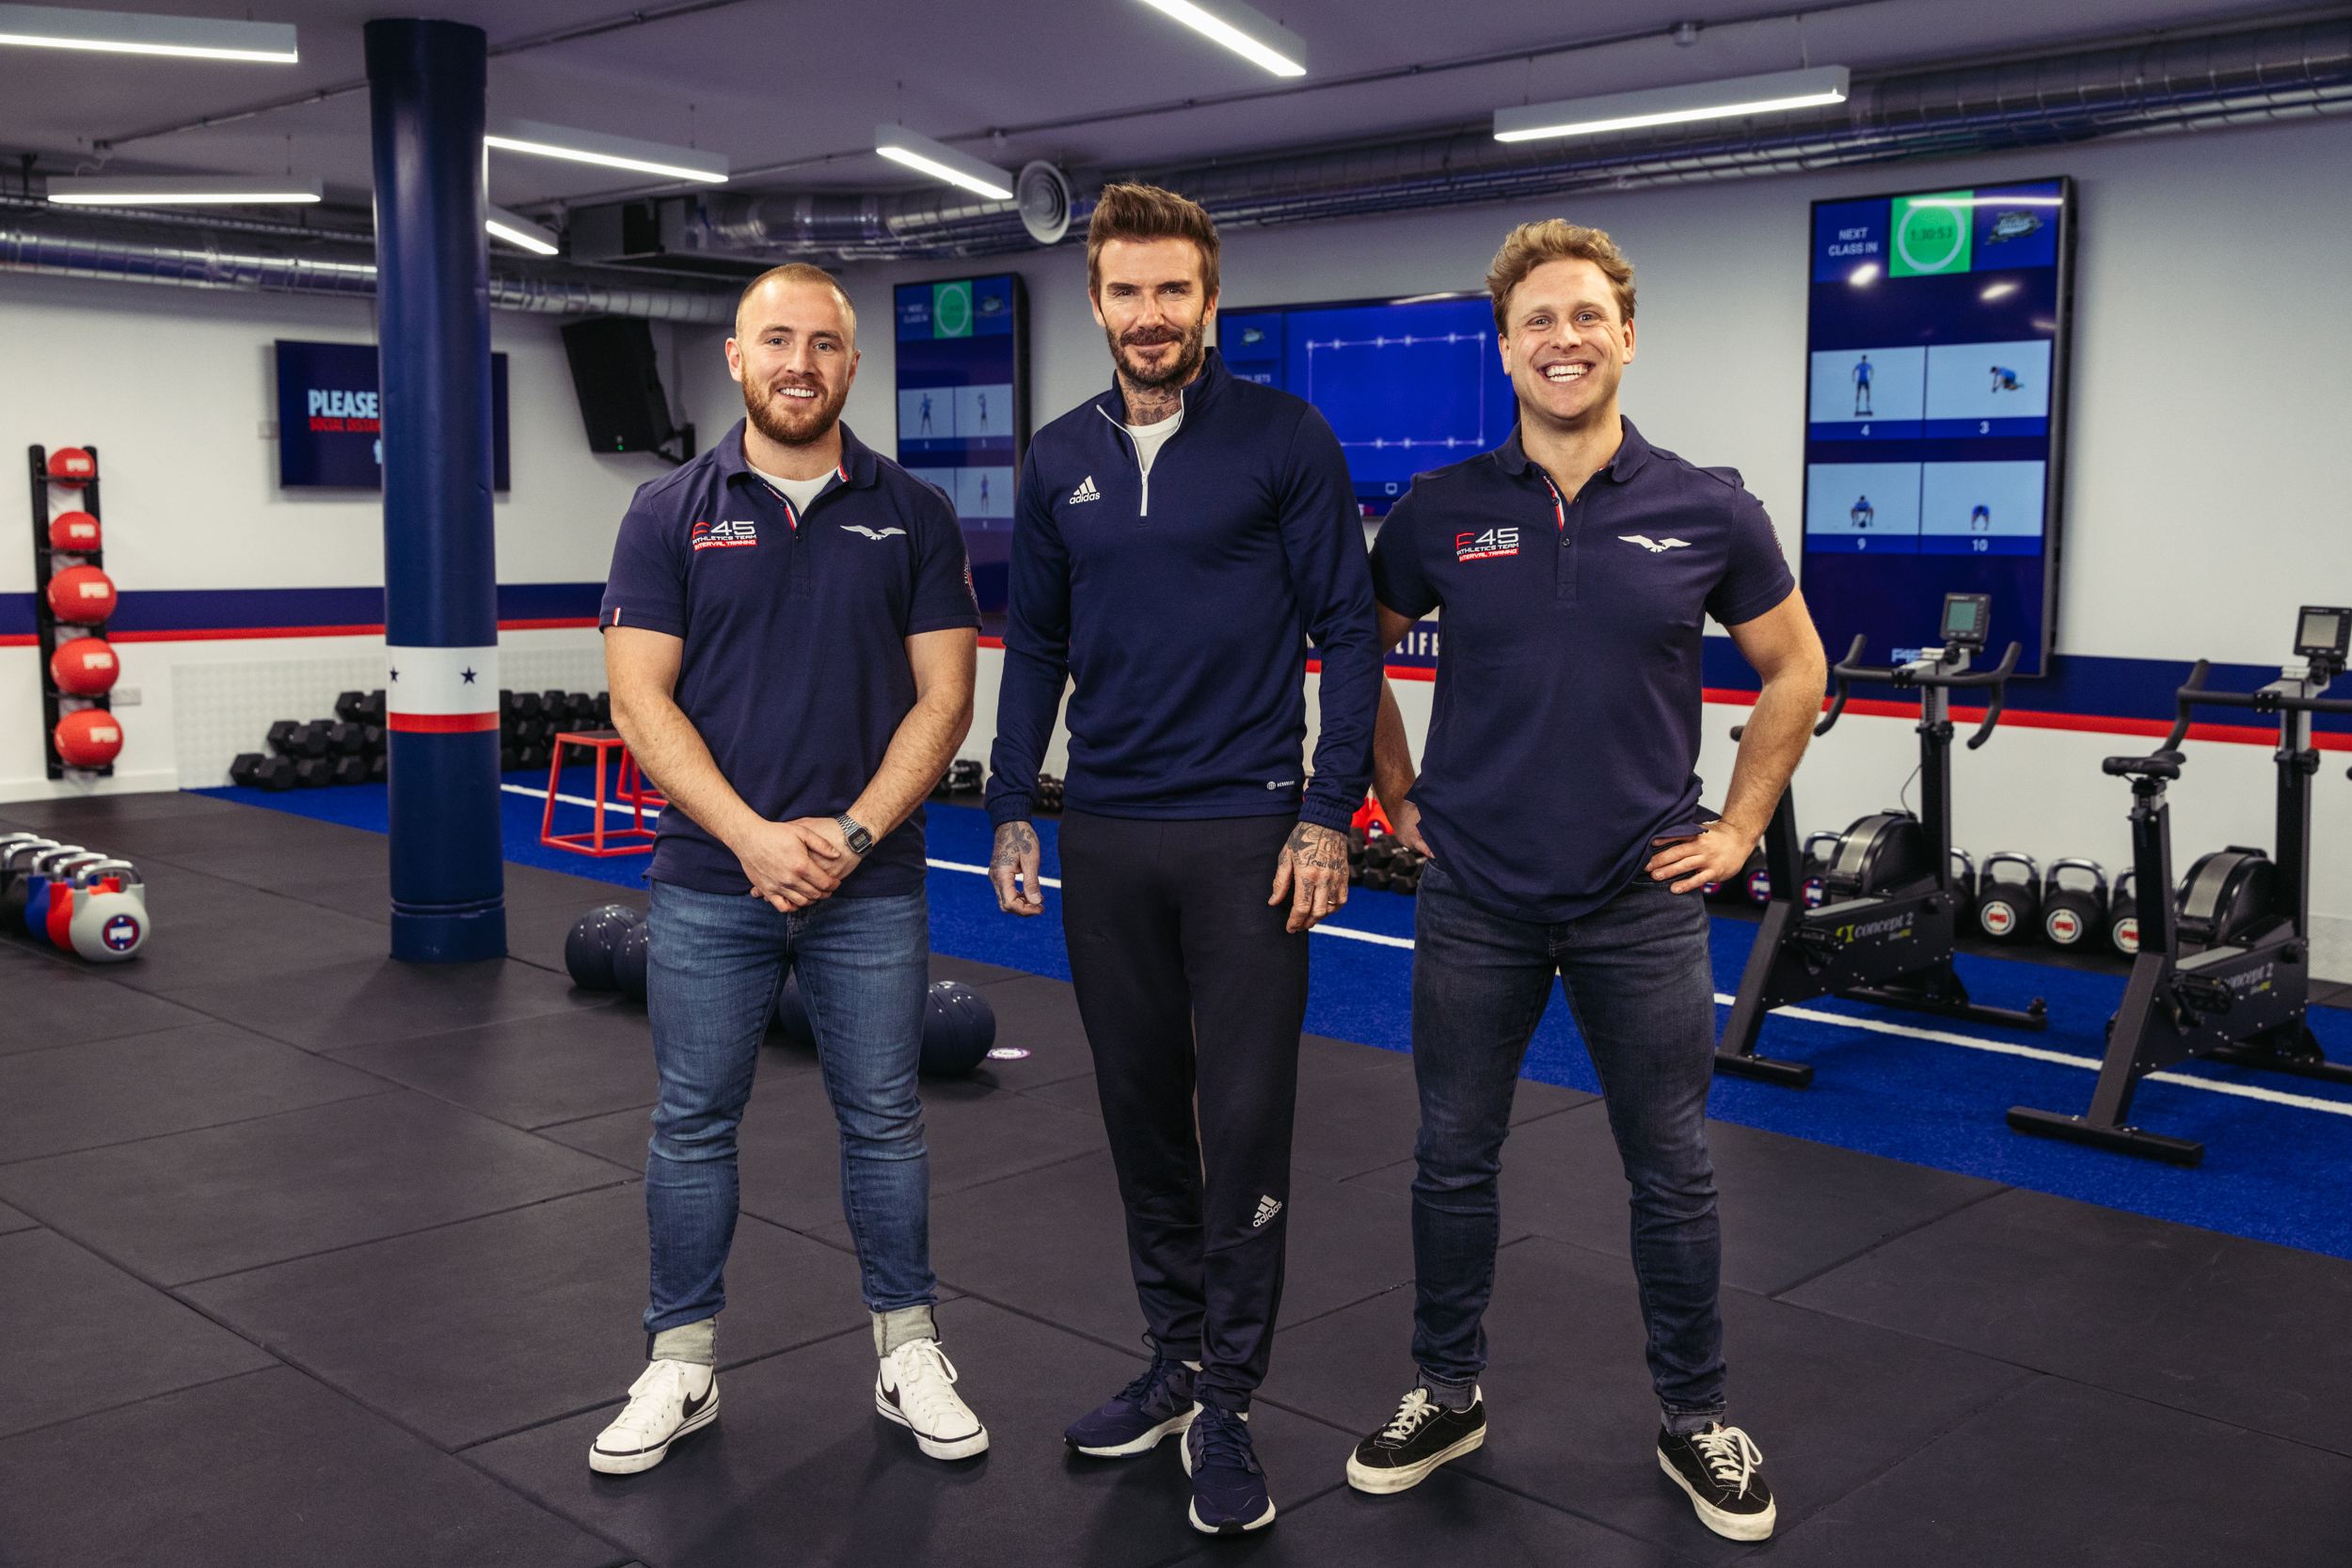 F45 Investor David Beckham Supports the Continued Growth of the